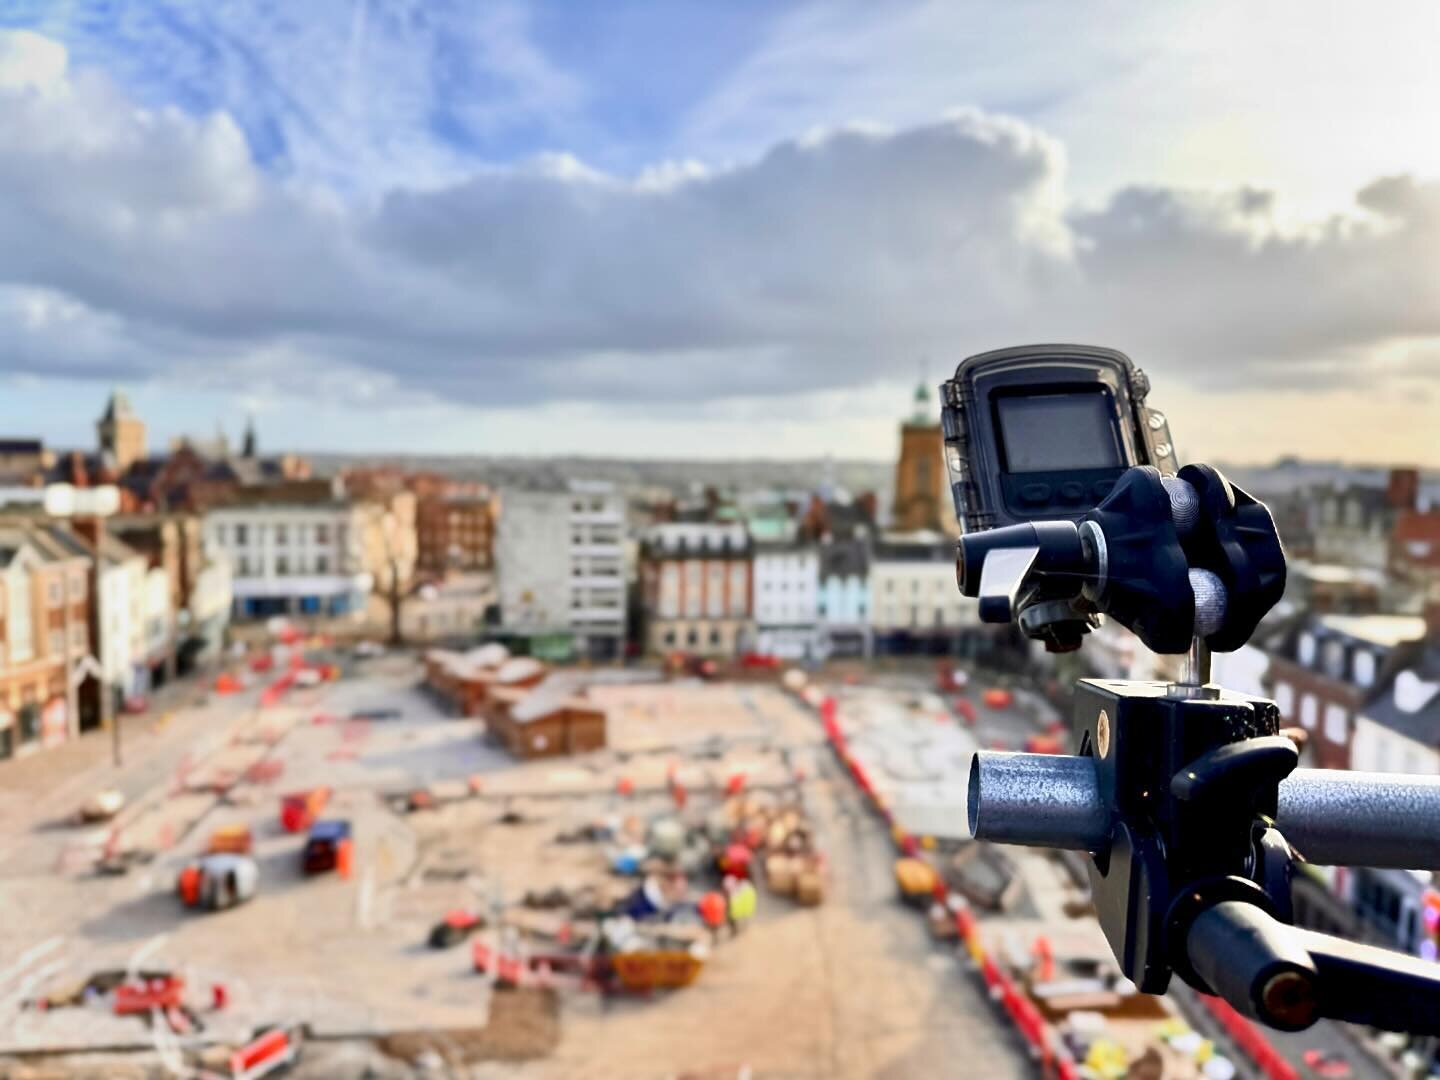 It&rsquo;s been over a year since the market square camera was started! 🔥

So far it has captured over 6,000 hours of footage which I have been busy compiling and labelling for the final edit.

I&rsquo;m impressed with the durability of the camera, 